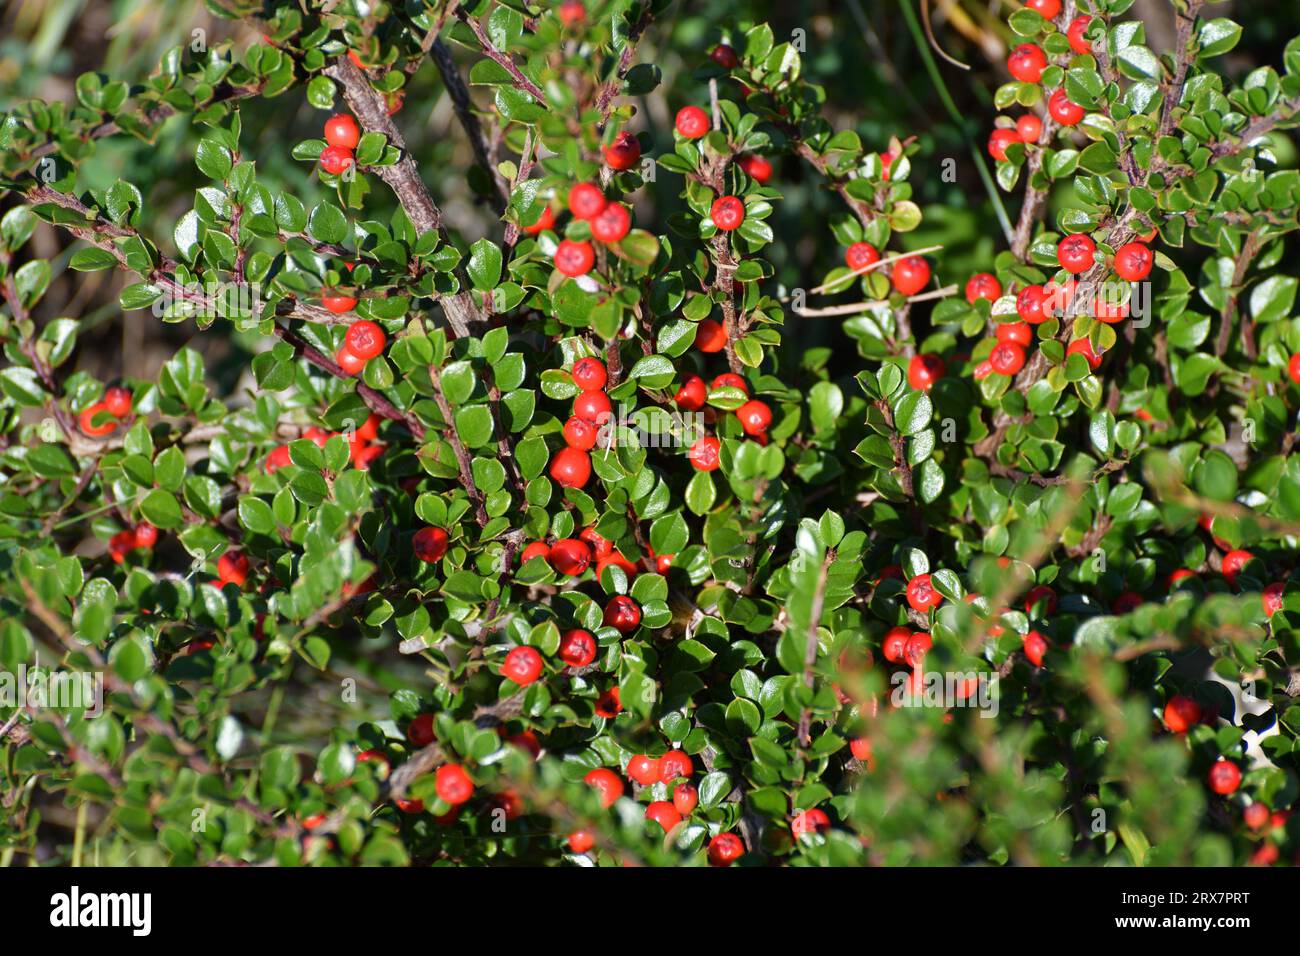 Cotoneaster - ornamental deciduous shrub with berries, used in landscape design. Stock Photo